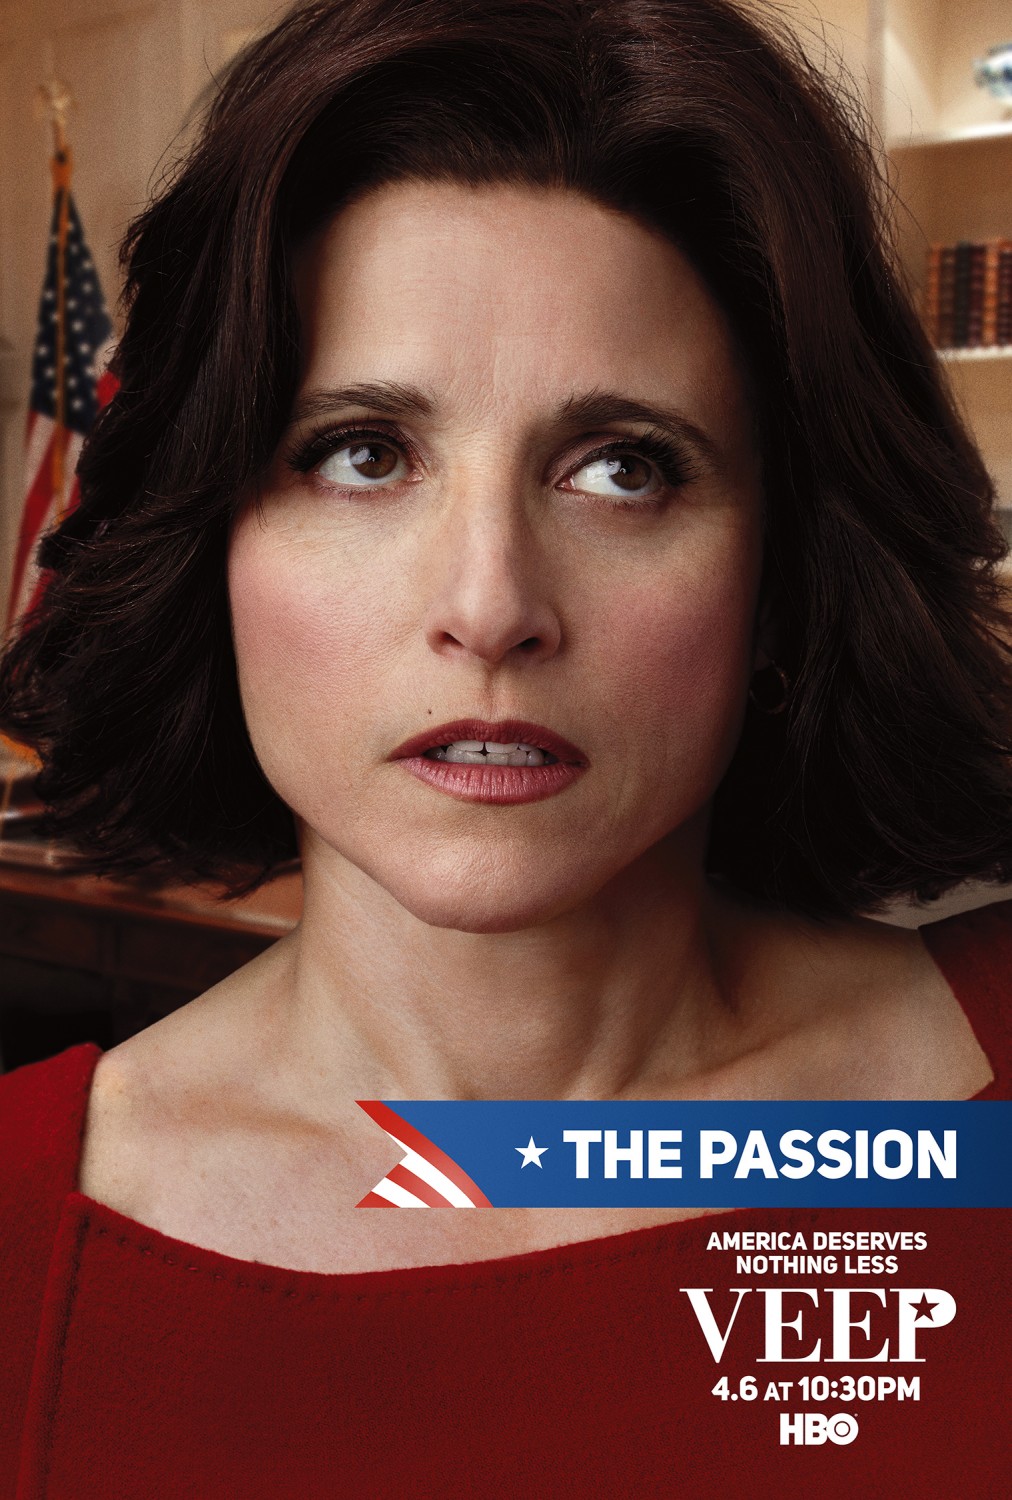 Extra Large TV Poster Image for Veep (#13 of 18)